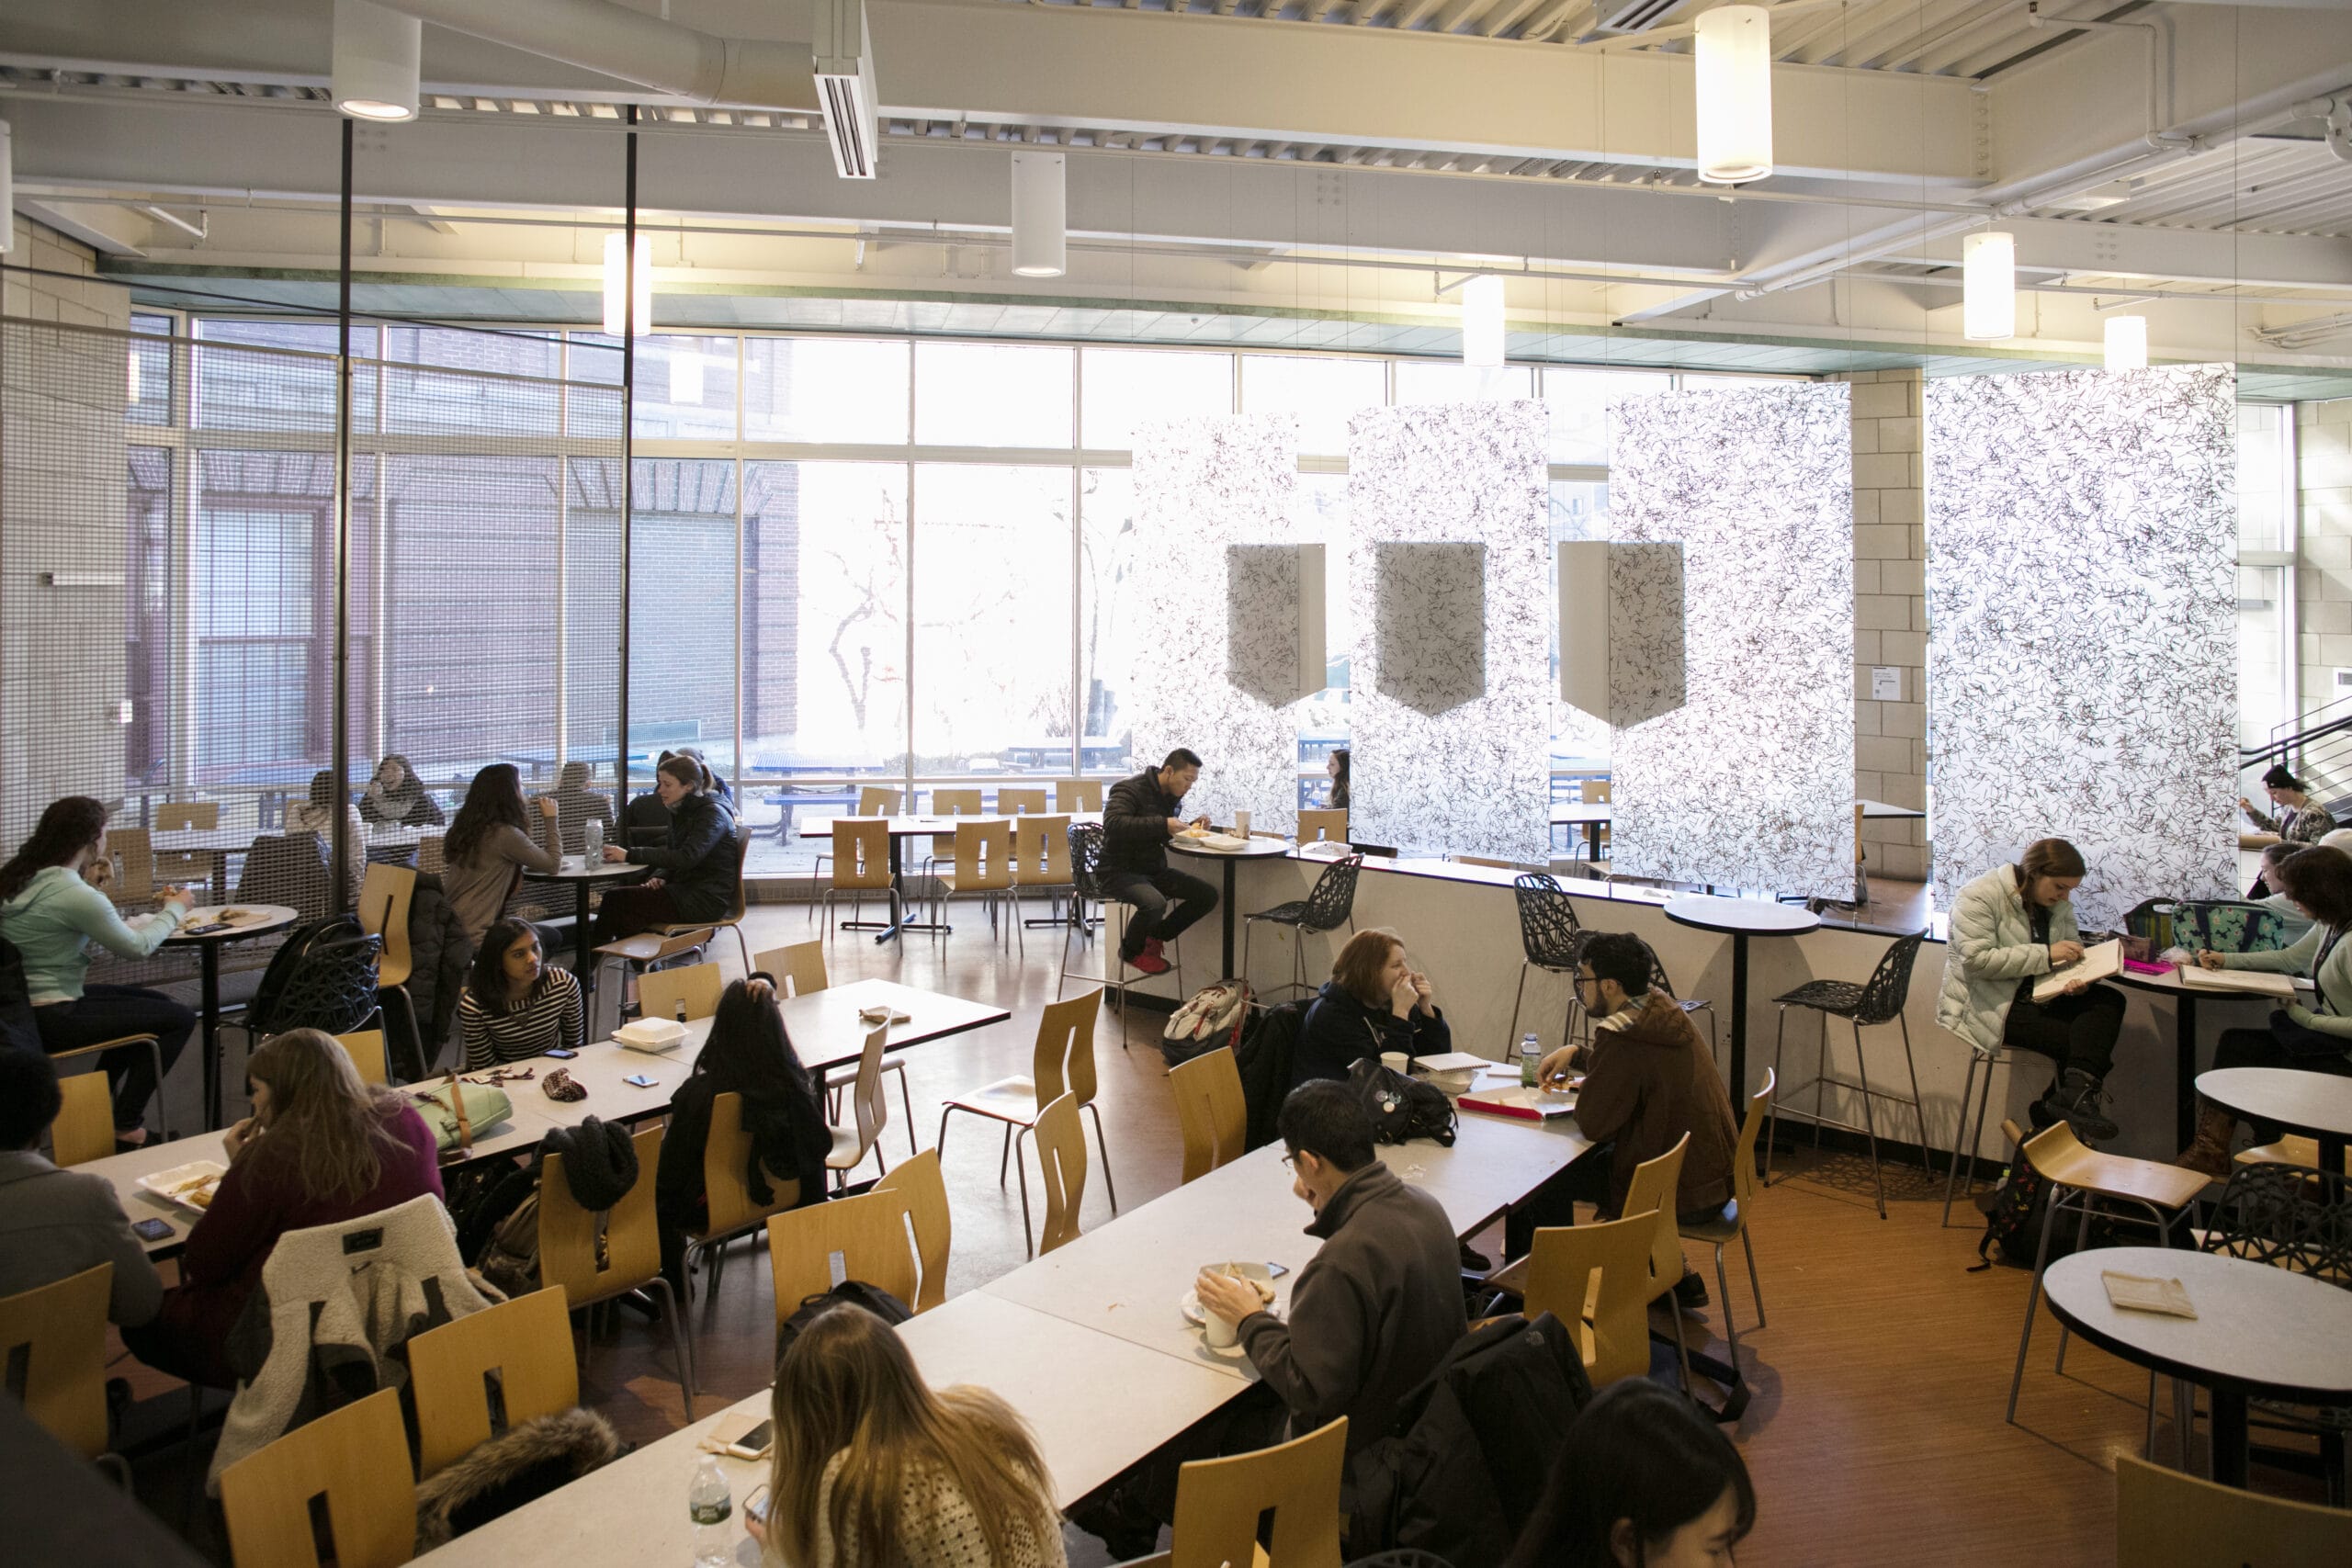 Students sit at tables eating in a modern dining hall.